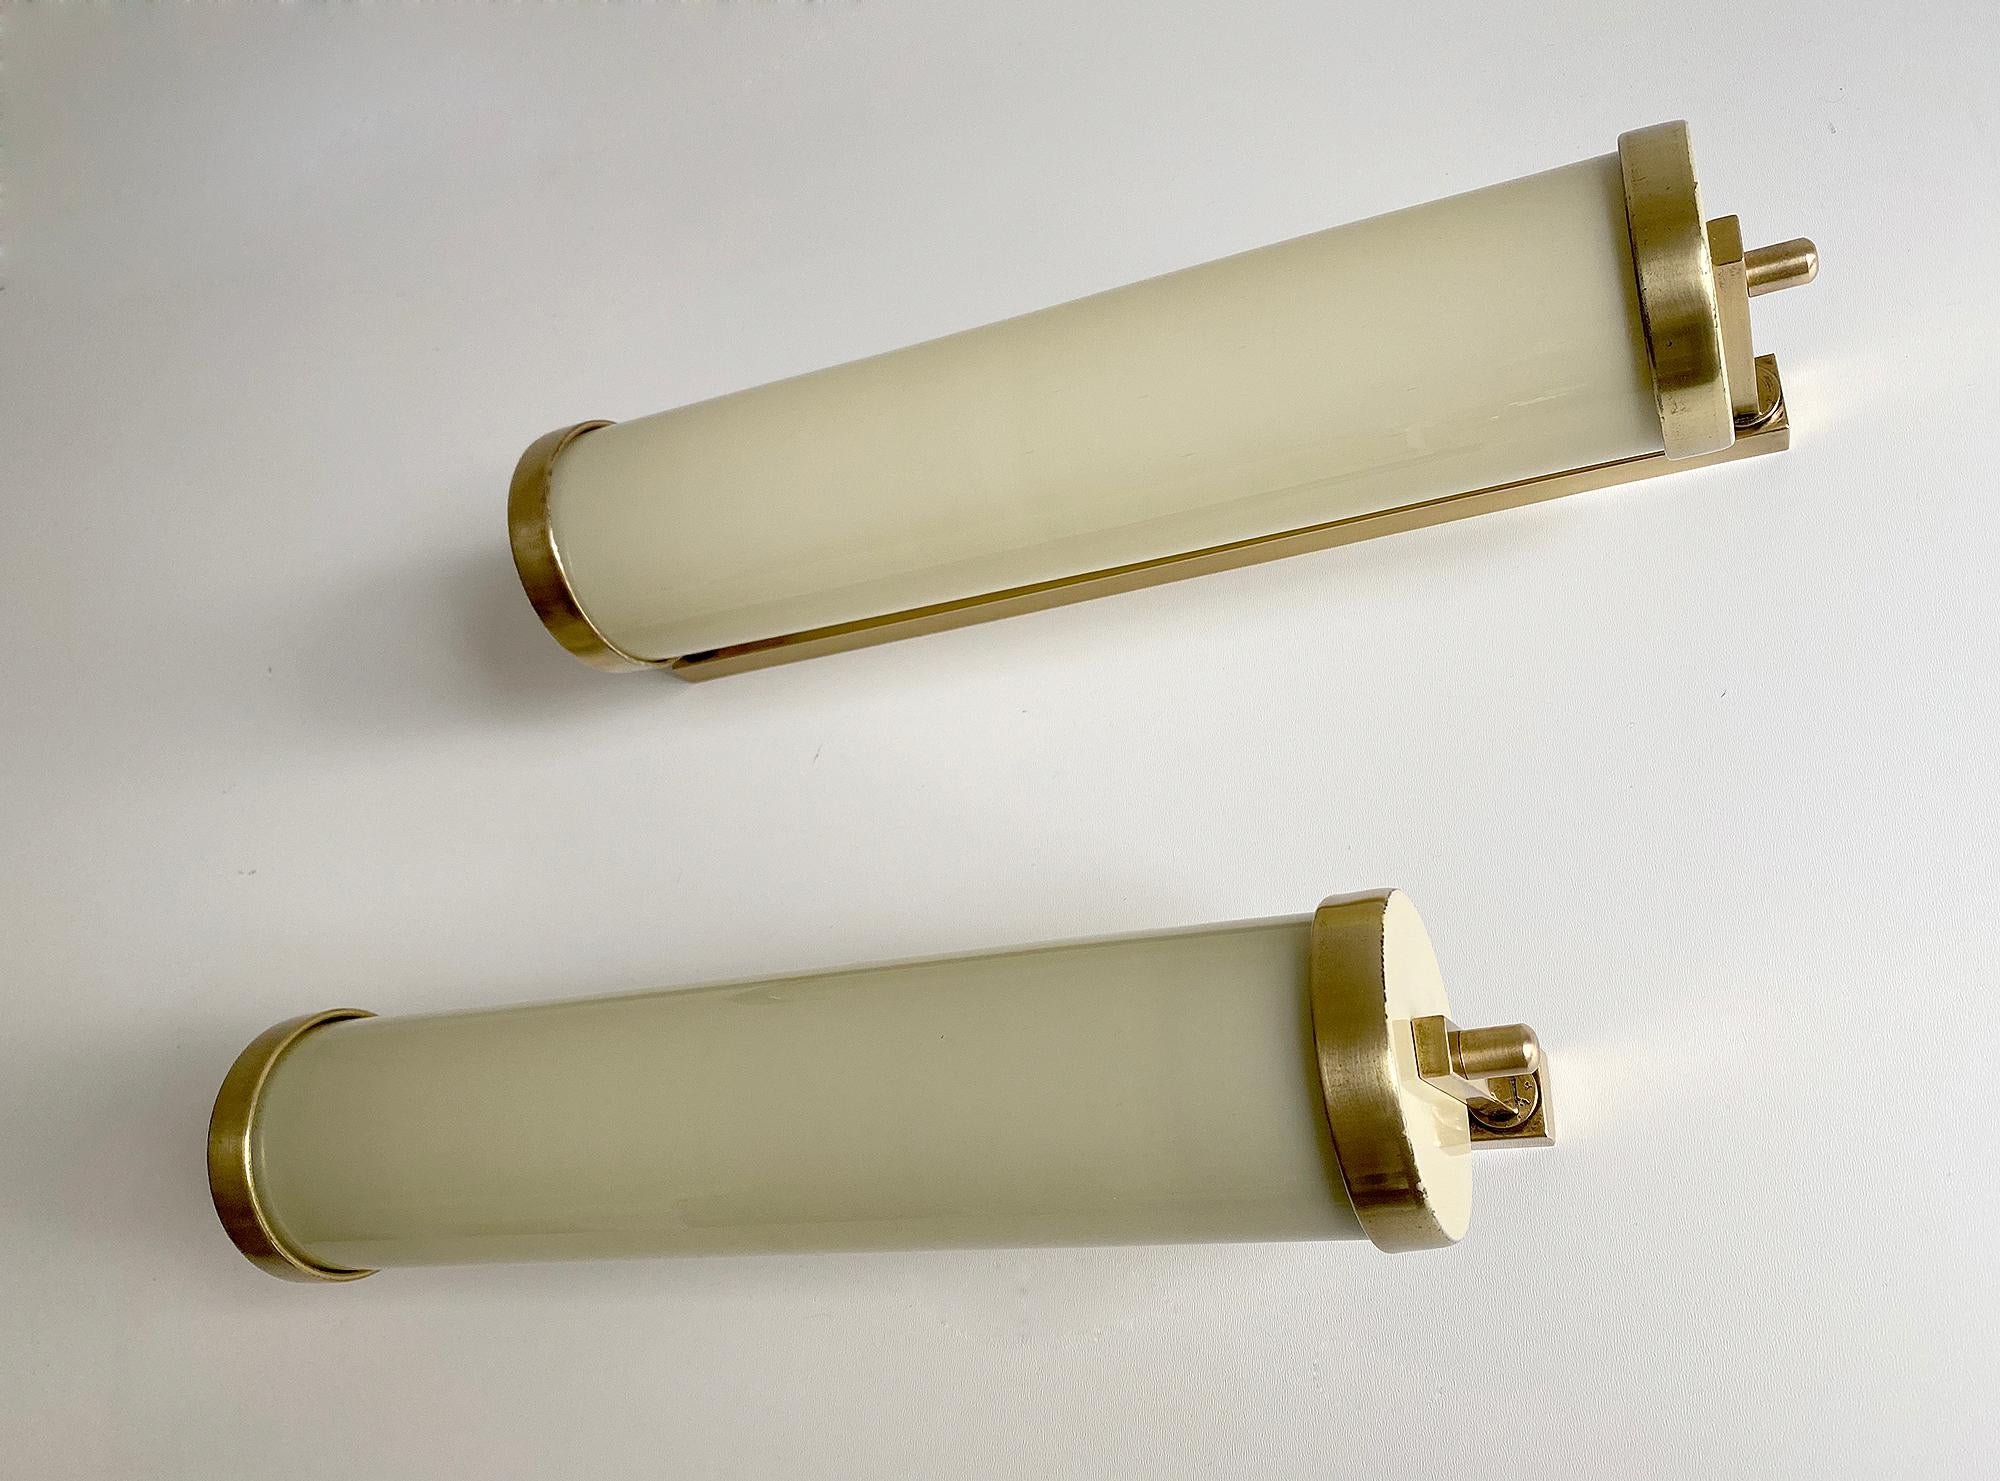 Pair of Large 1930s Art Deco Bauhaus Sconces, Brass and Glass For Sale 6